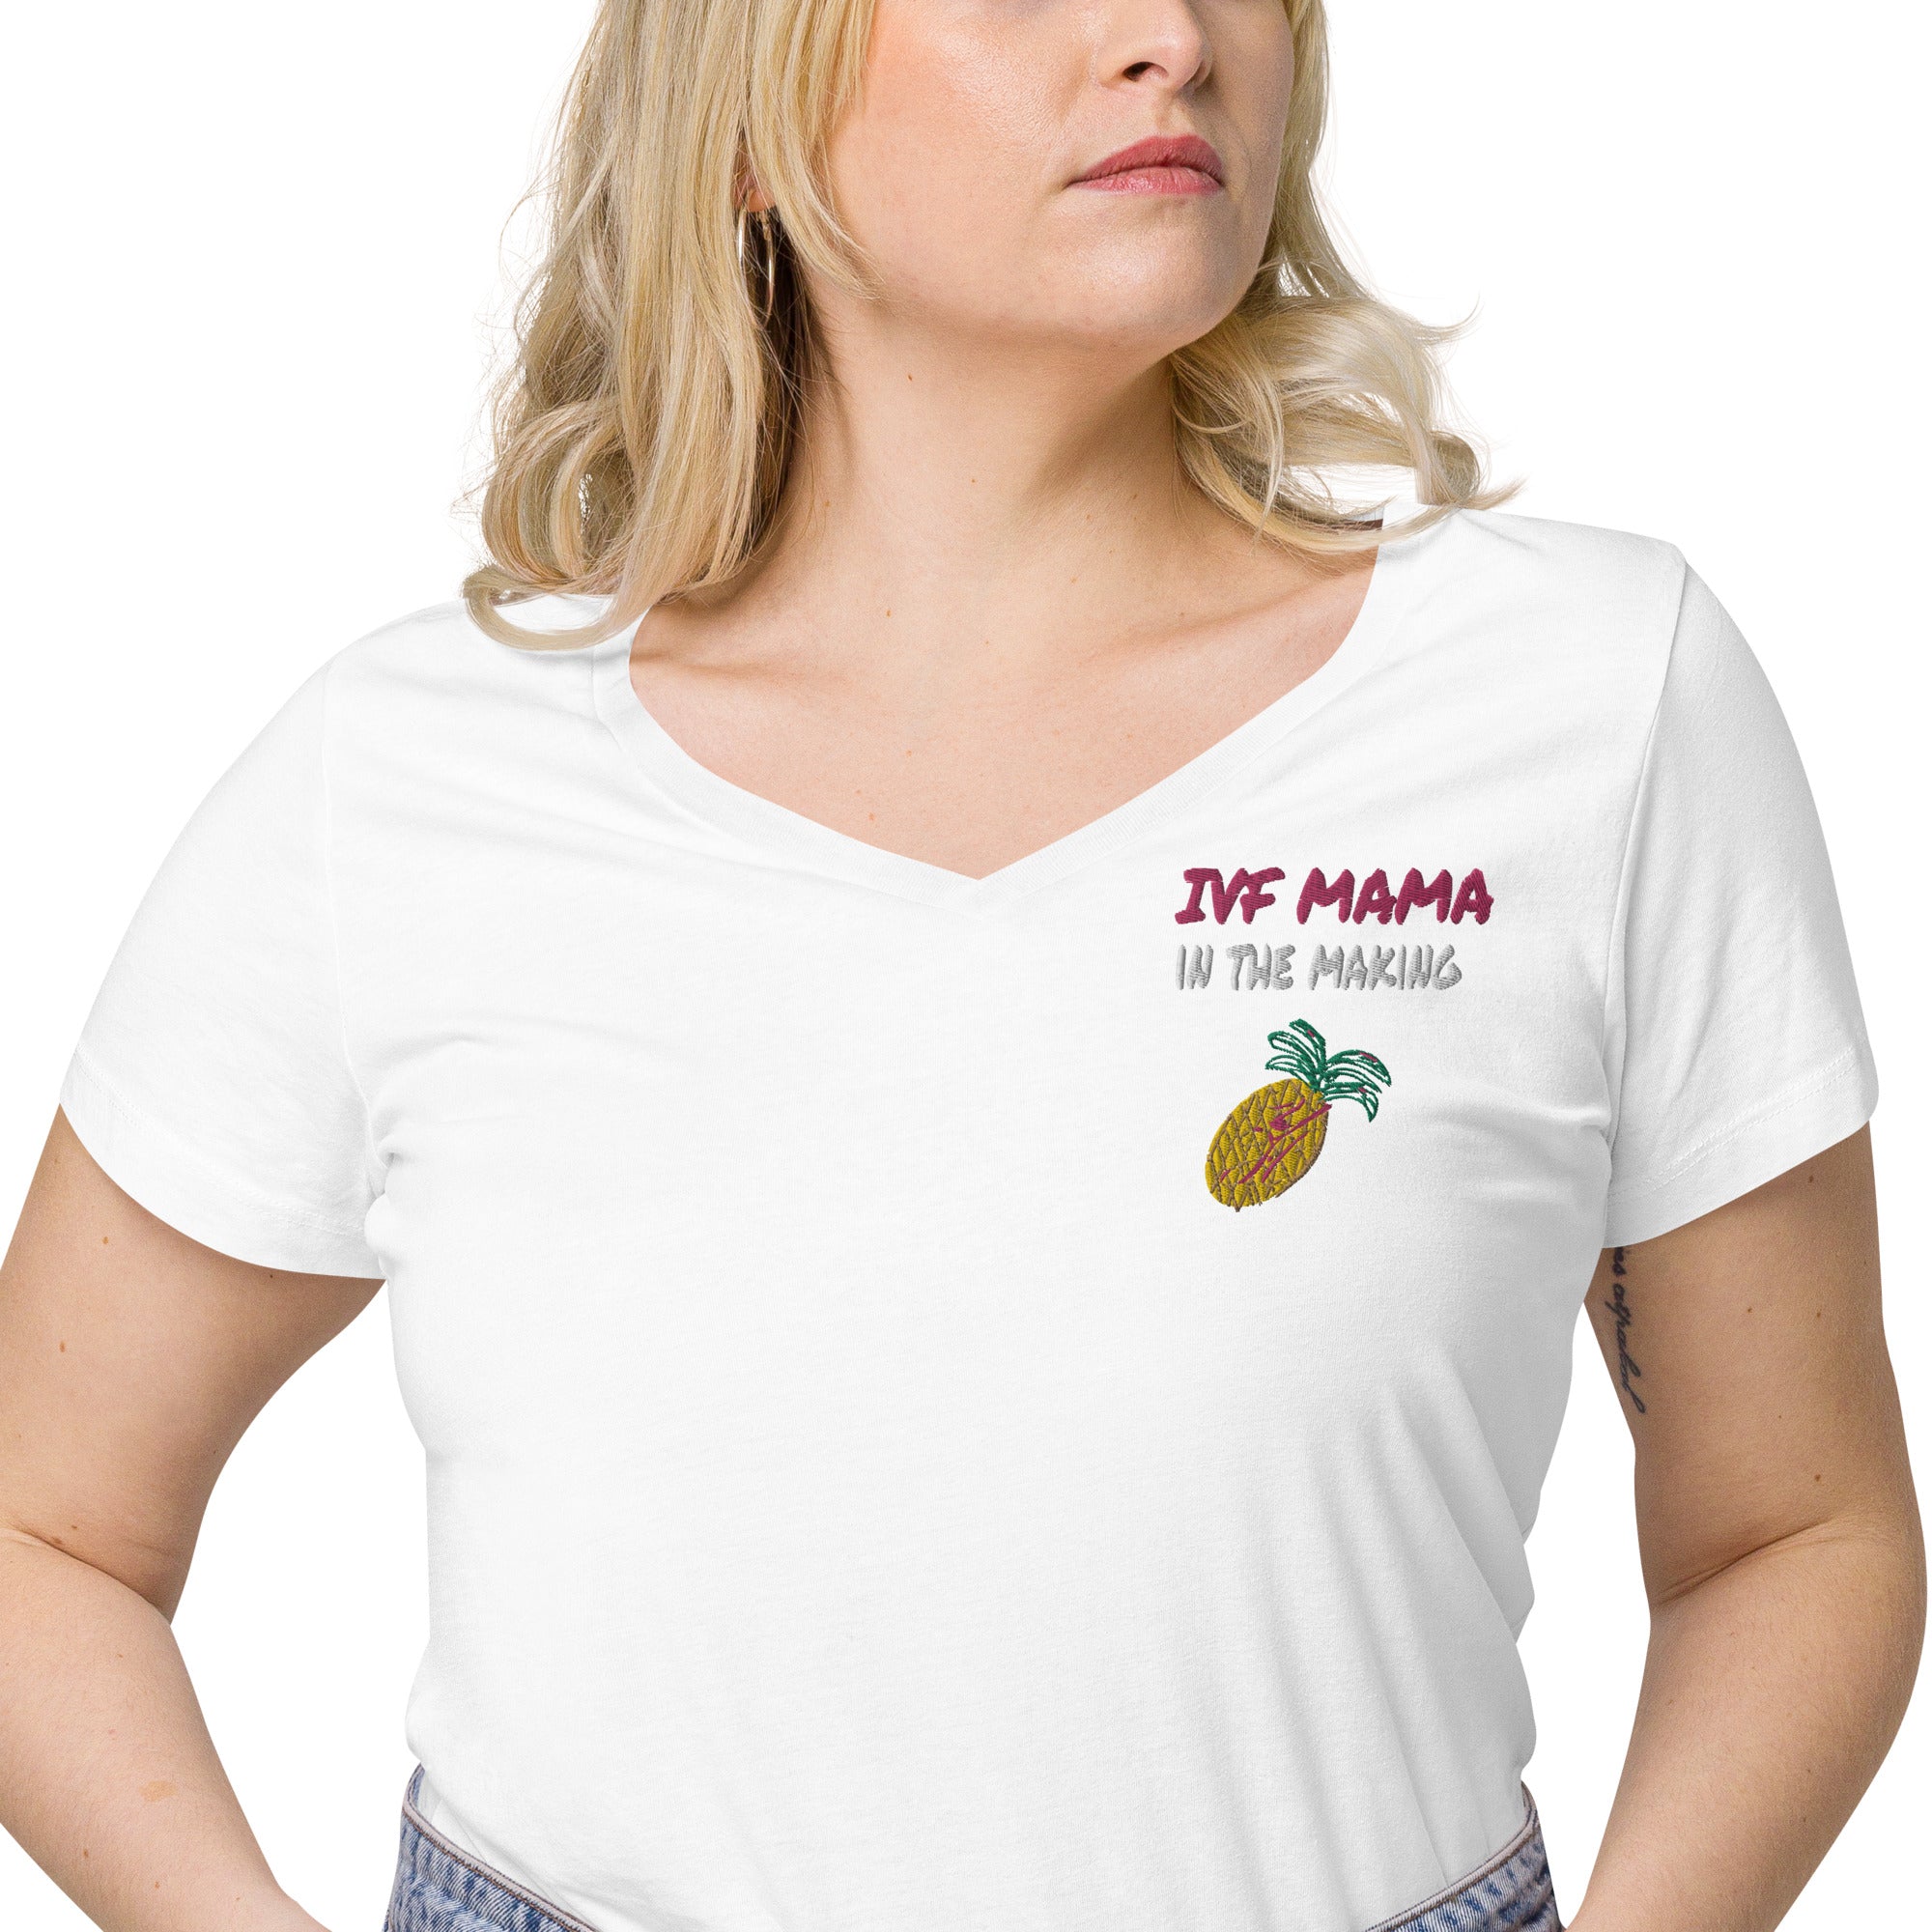 Ivf Mama in the making shirt fitted V-neck t-shirt - Young Hugs